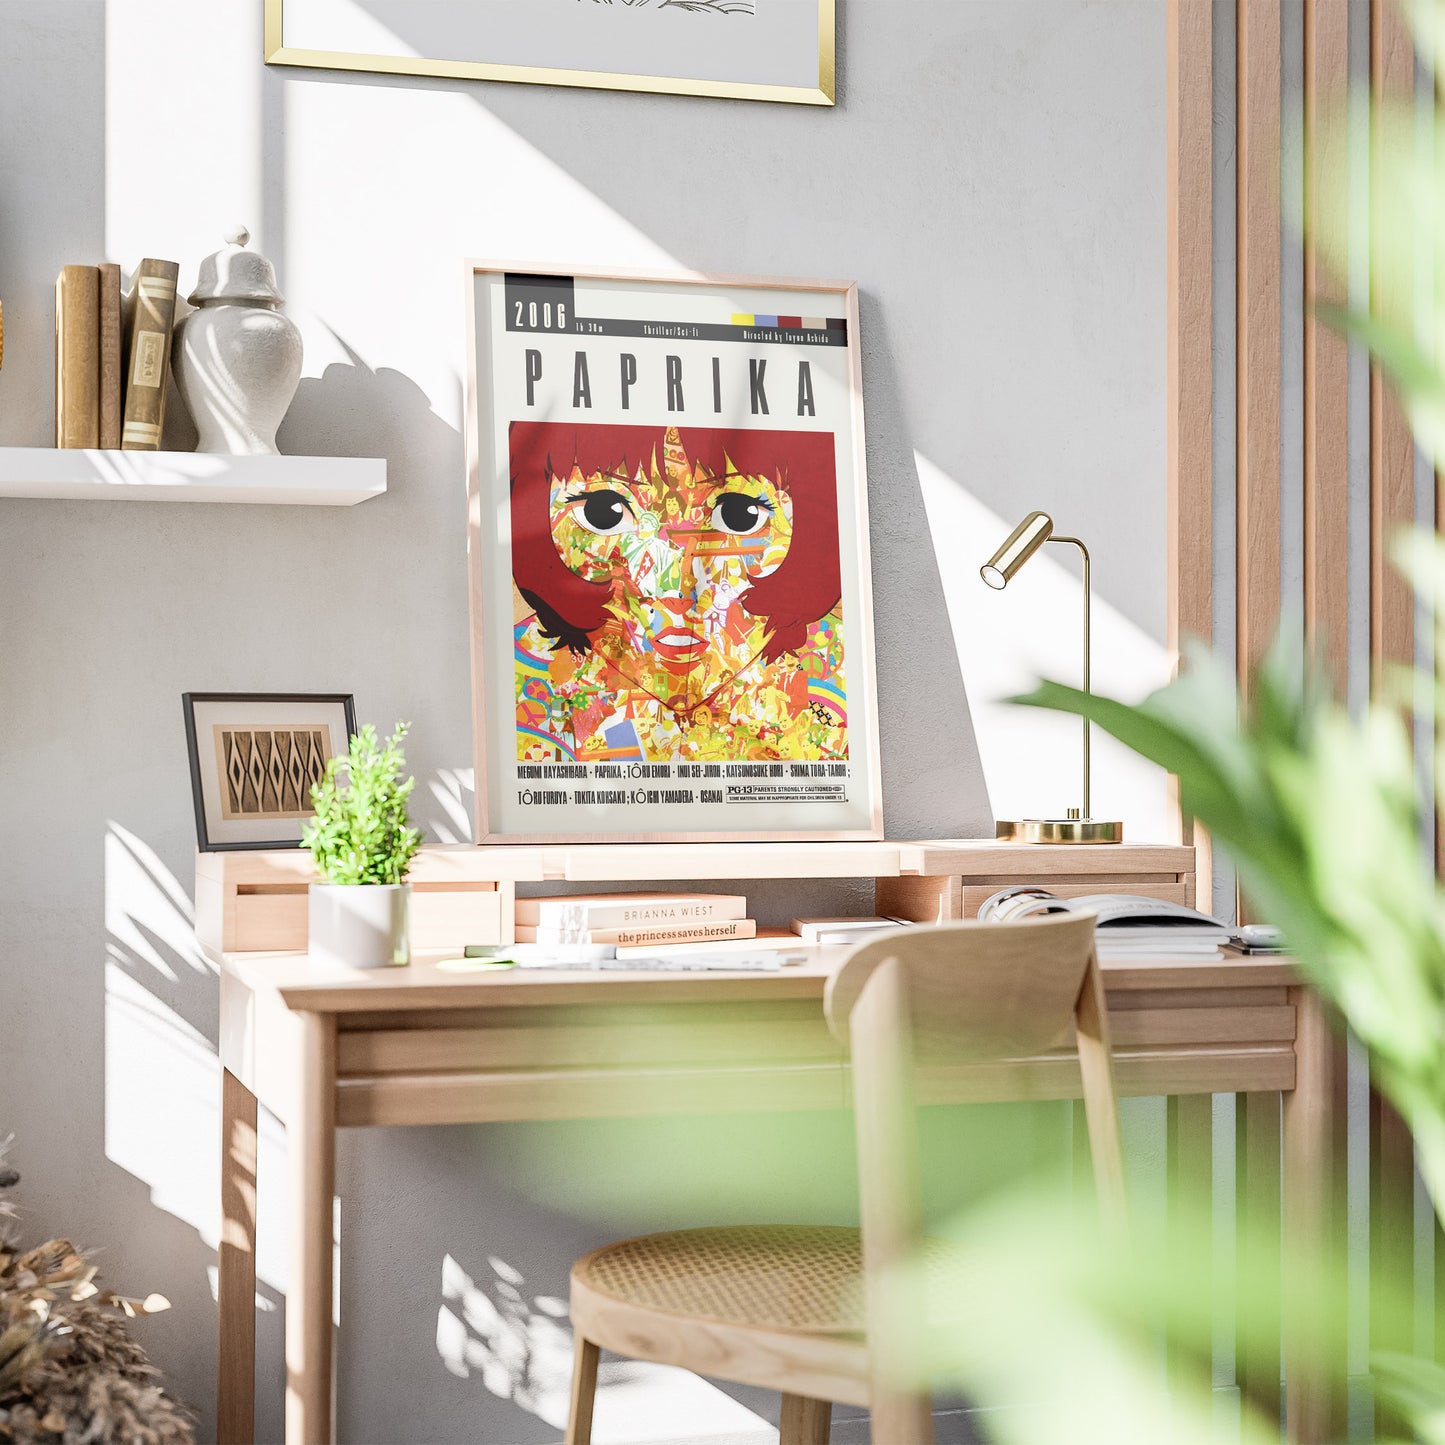 Discover the mesmerizing world of classic anime with Paprika Movie posters. Featuring stunning artwork from the beloved film, these posters are a must-have for any fan or collector. Made with high-quality materials, add a touch of nostalgia to your decor with these beautifully designed posters.